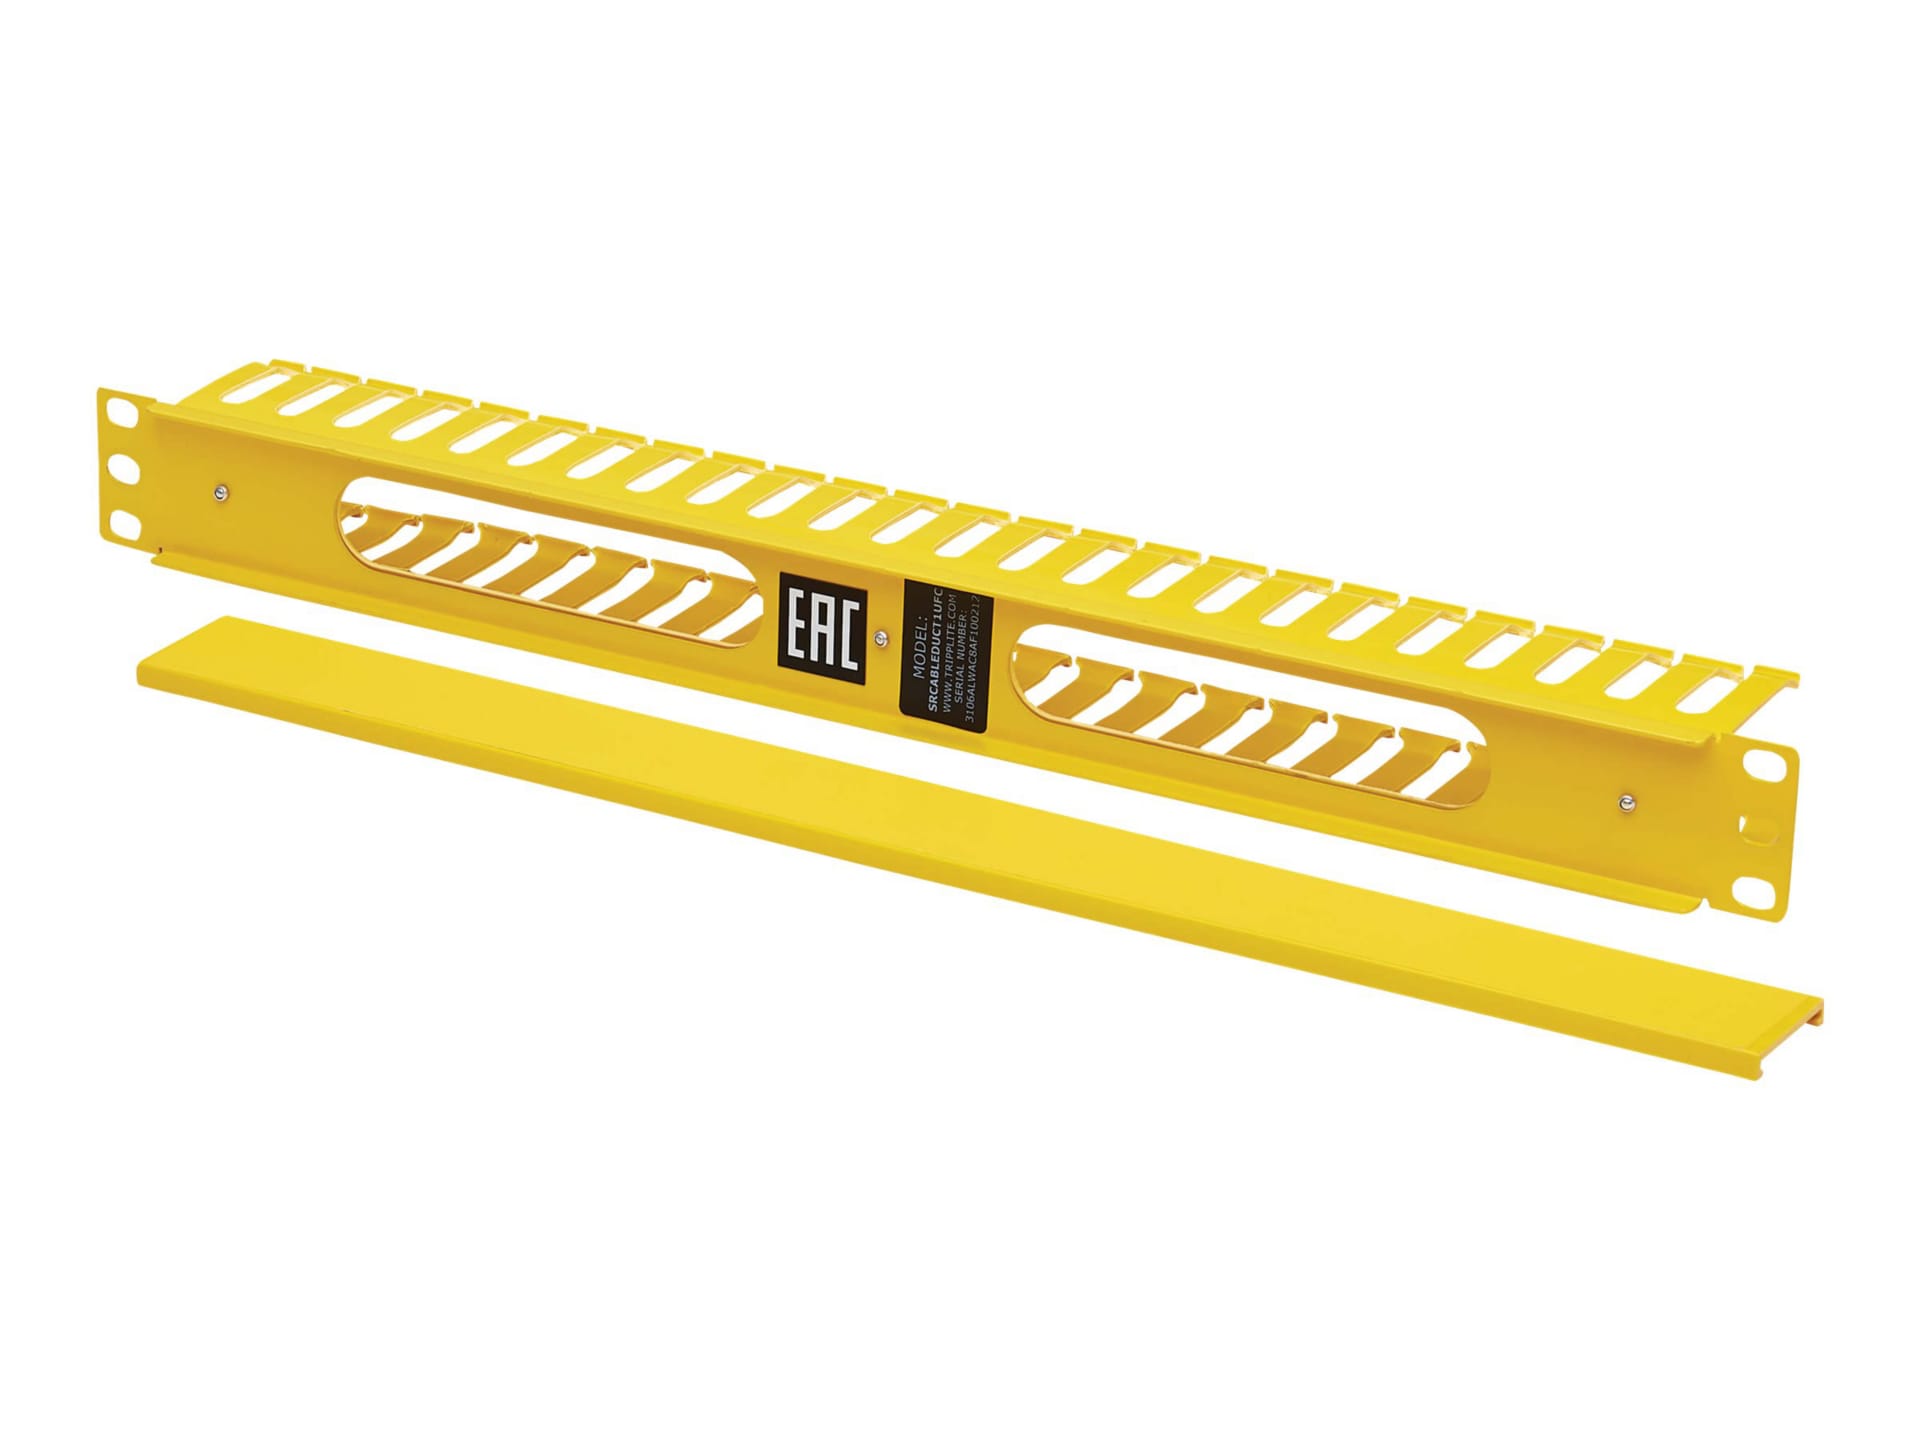 Tripp Lite Horizontal Cable Manager - Finger Duct with Cover, Yellow, 1U - rack cable management duct with cover